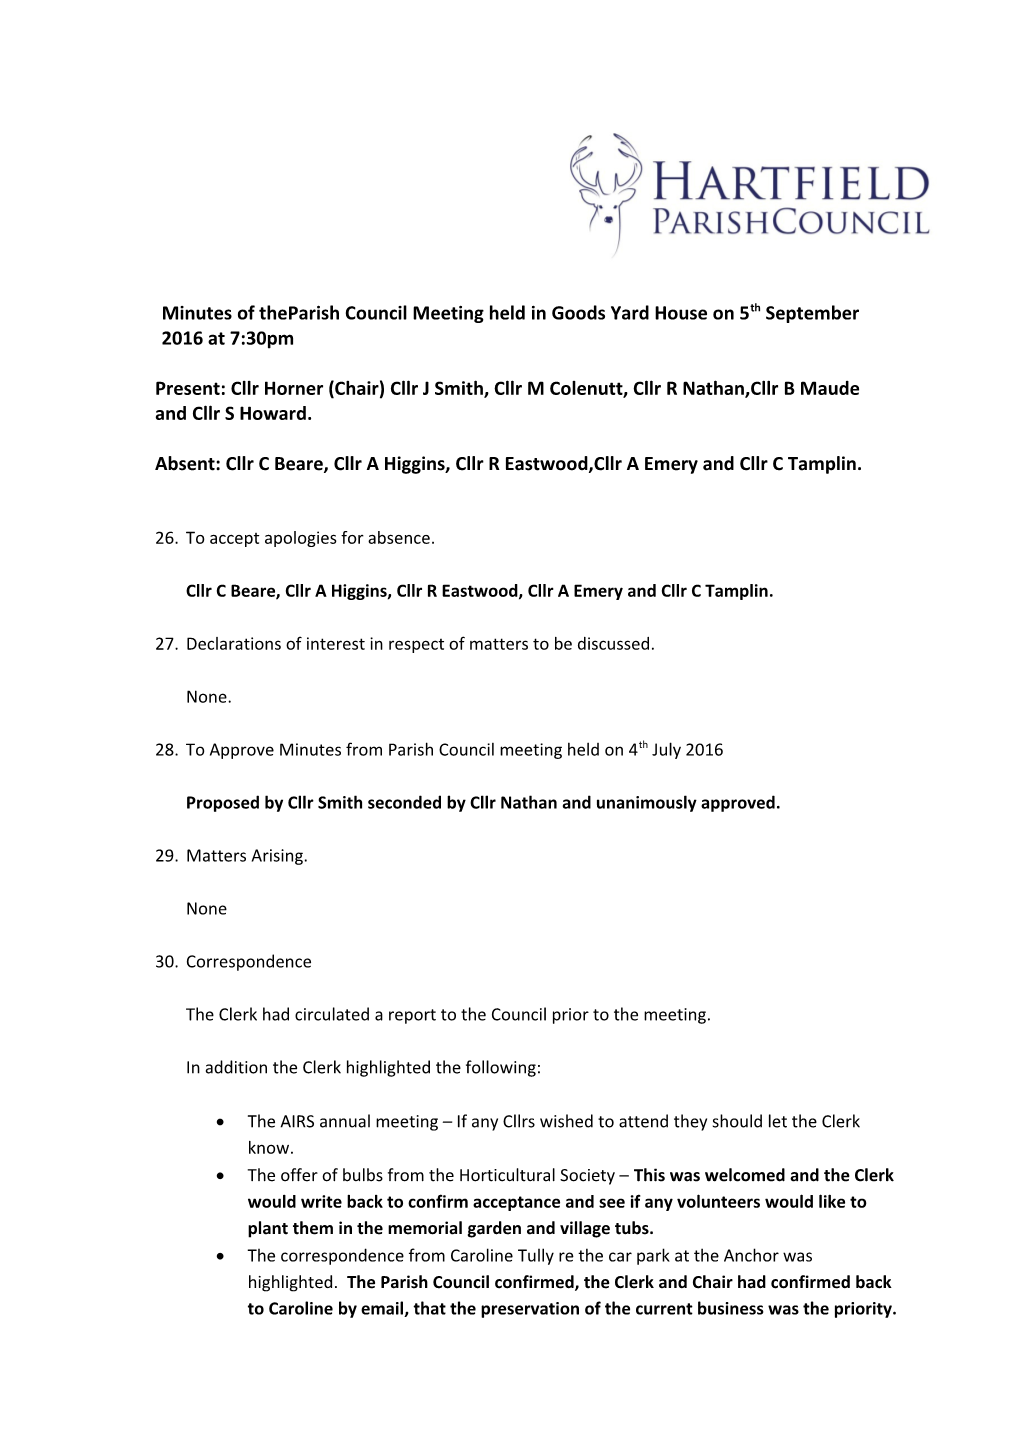 Minutes of Theparish Council Meeting Held in Goods Yard House on 5Th September 2016 at 7:30Pm